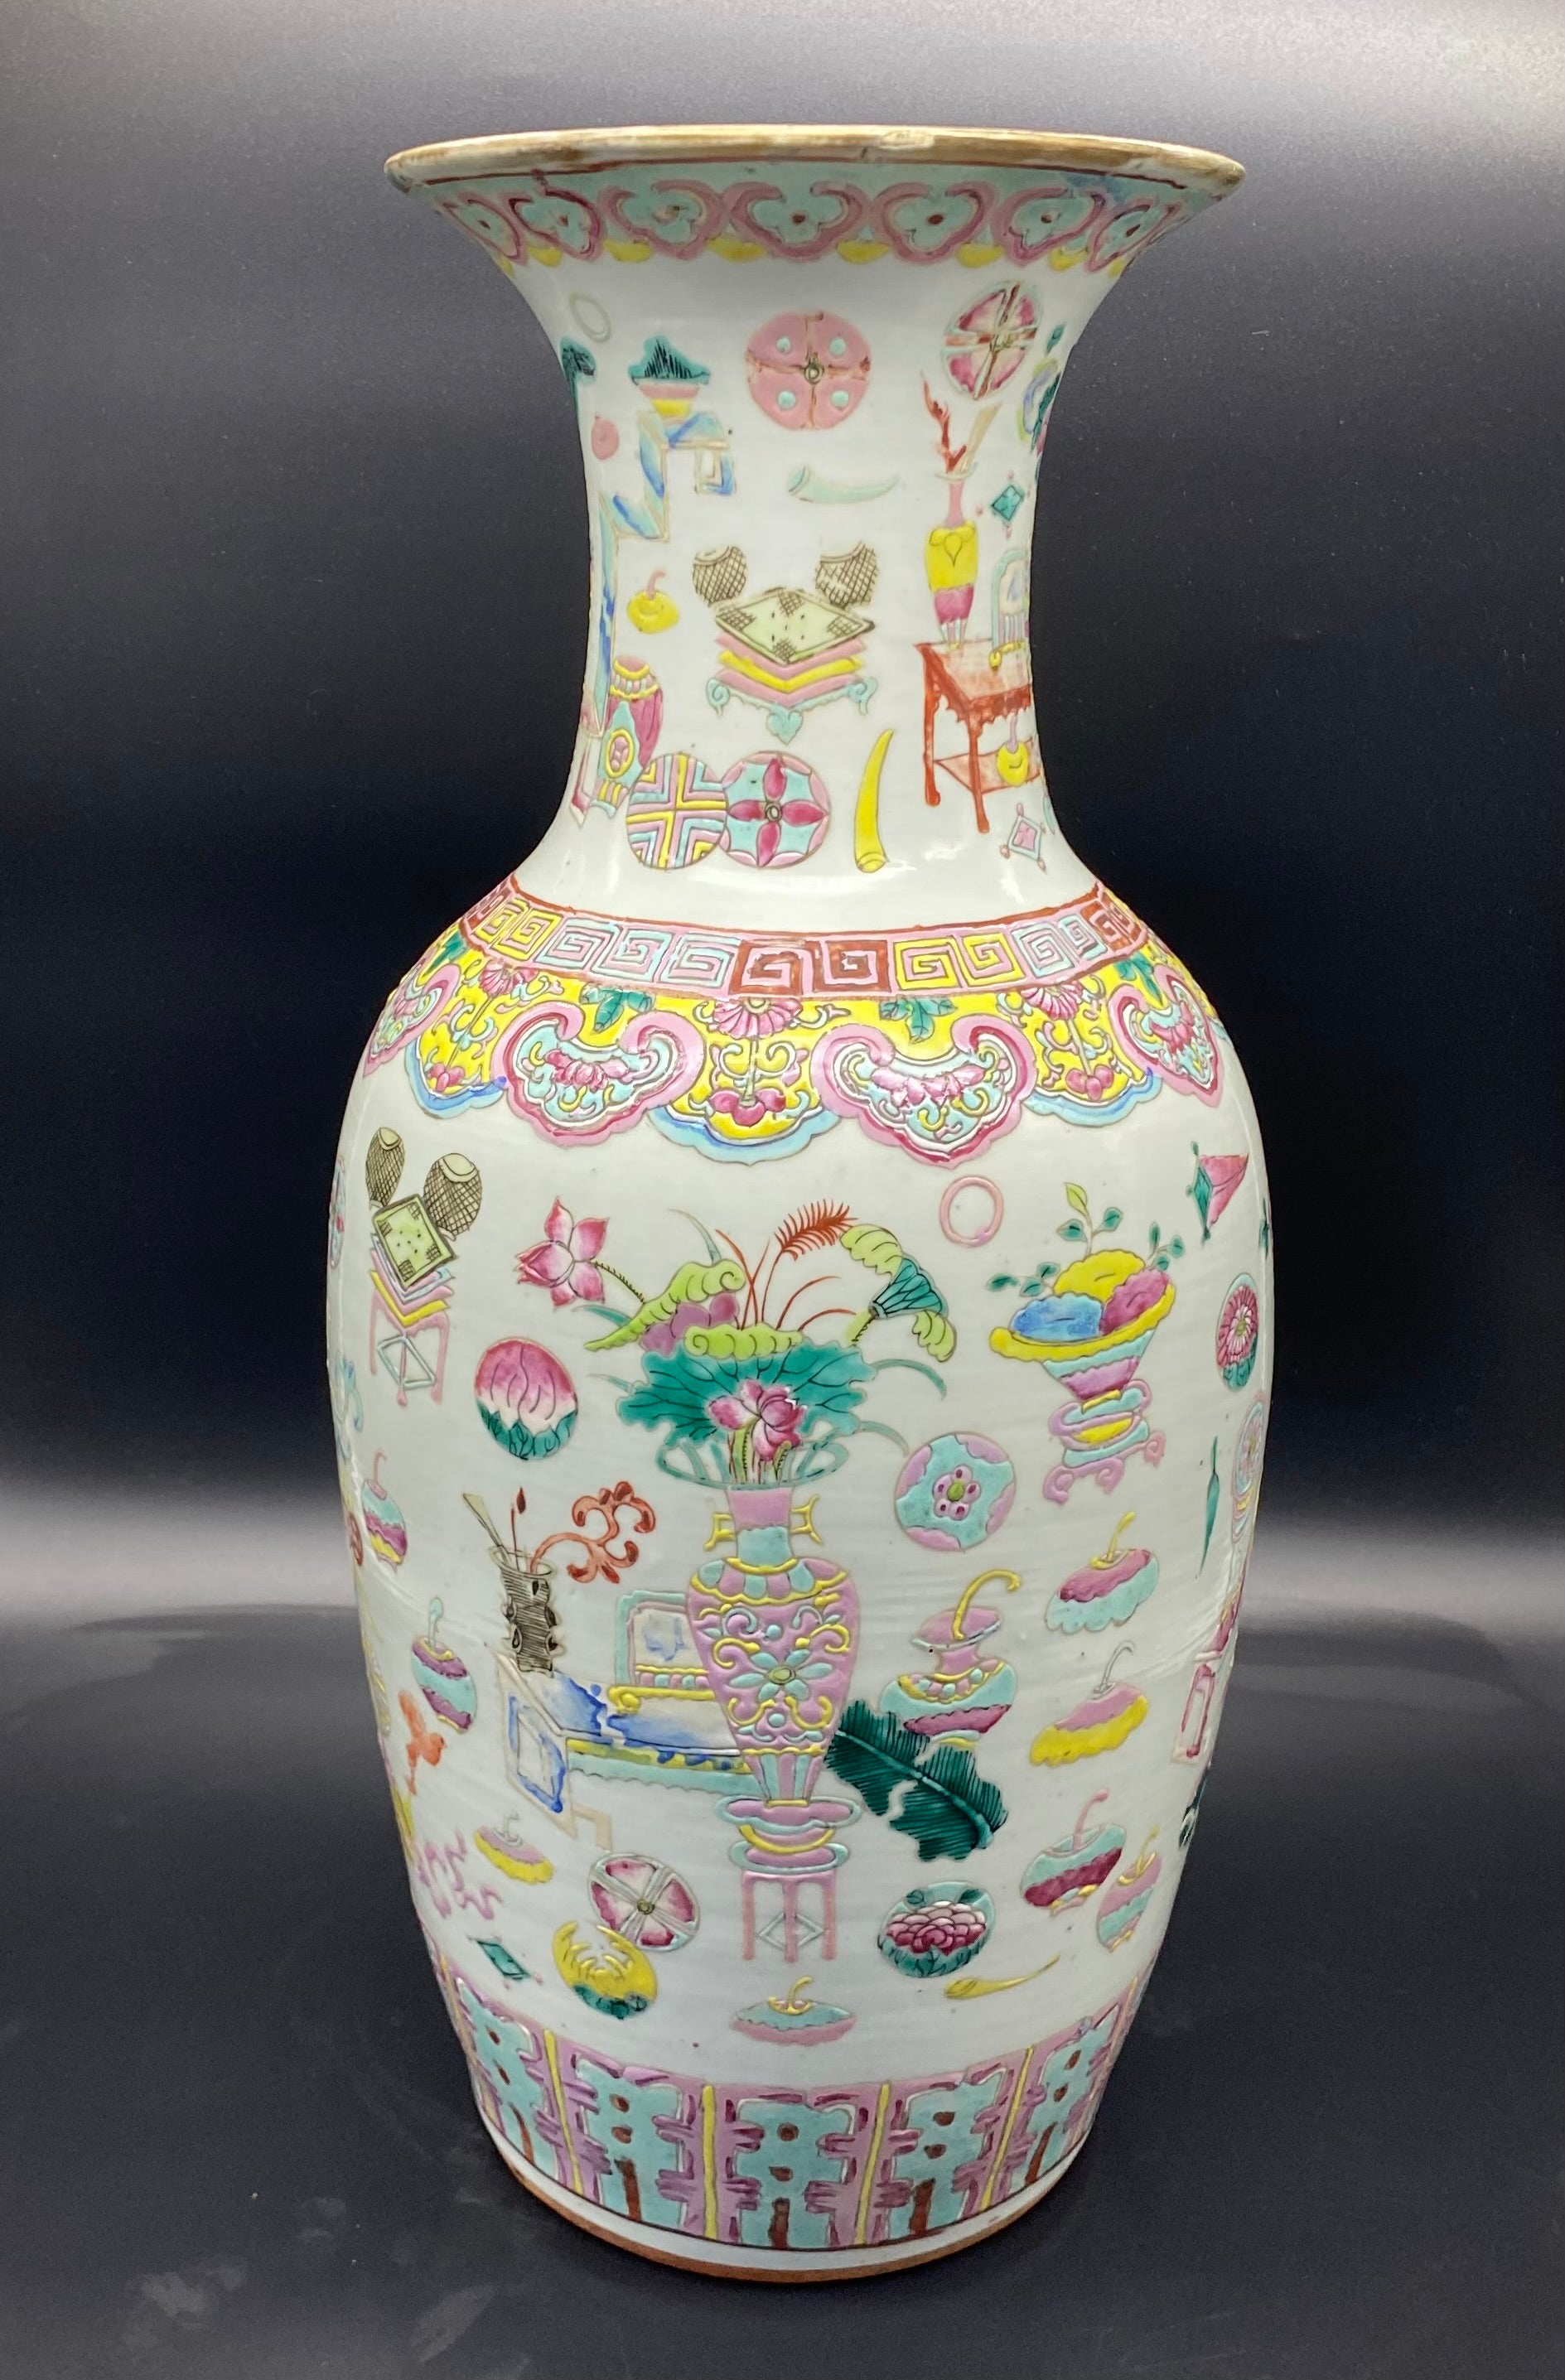 Antiques & Collectables - Large Chinese famille rose decorated vase very well painted with brightly Coloured Enamels, scholars object and flower ball decoration.